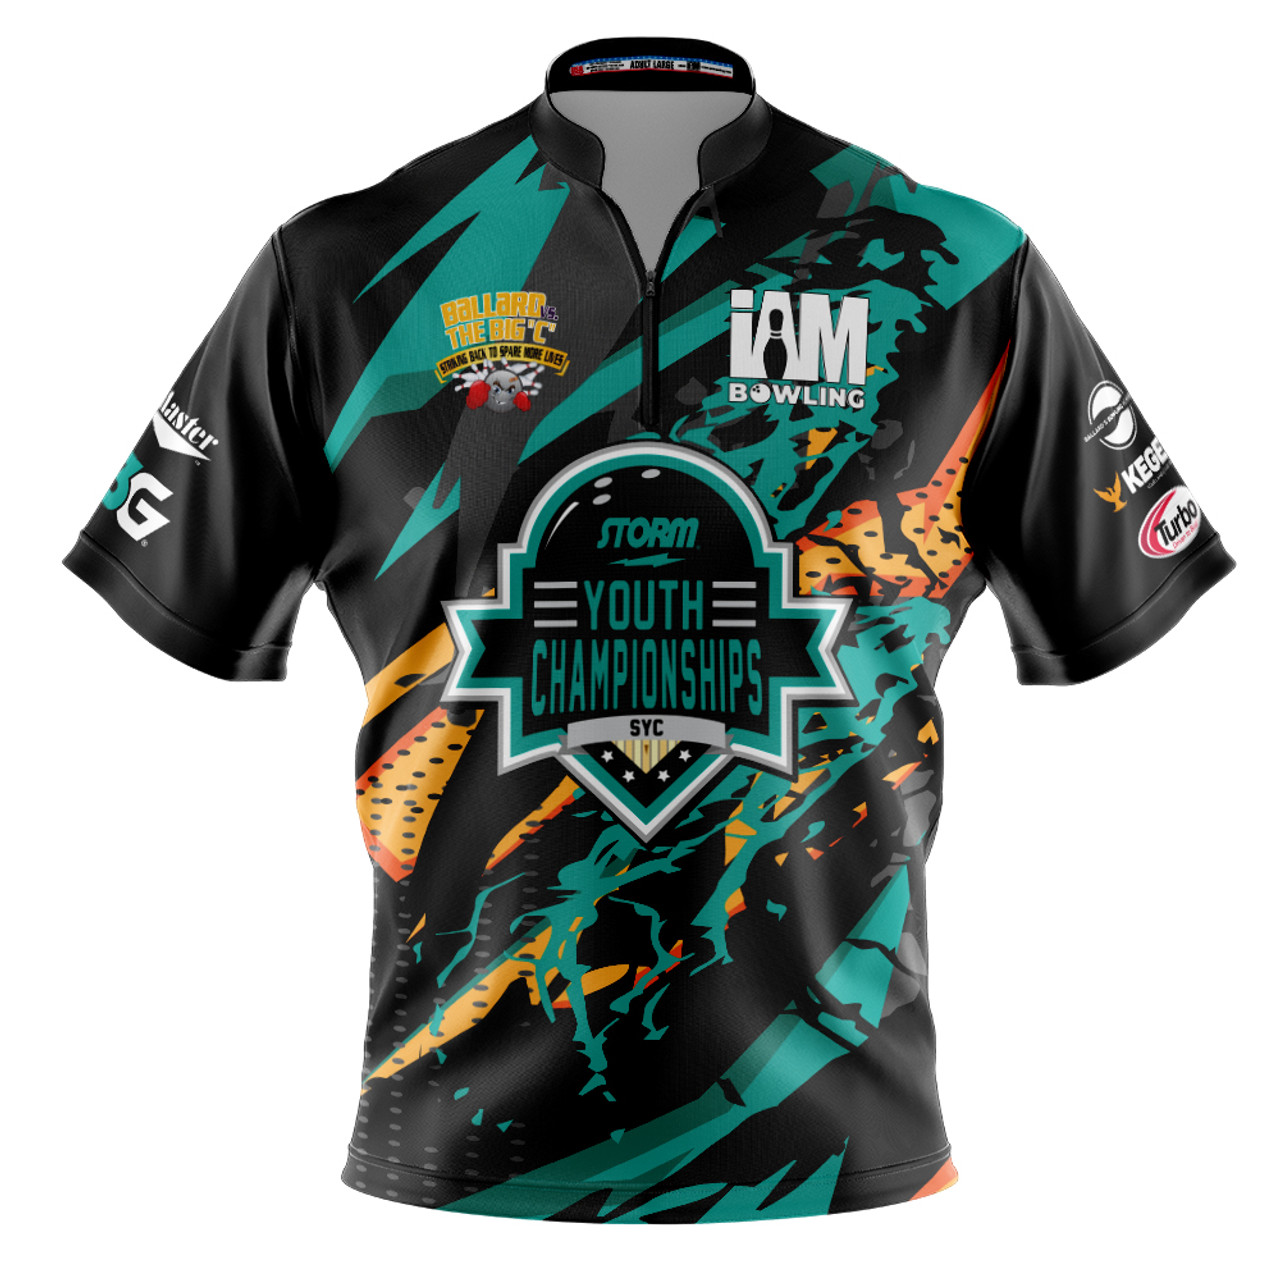 DS Bowling Jersey - Design 2021